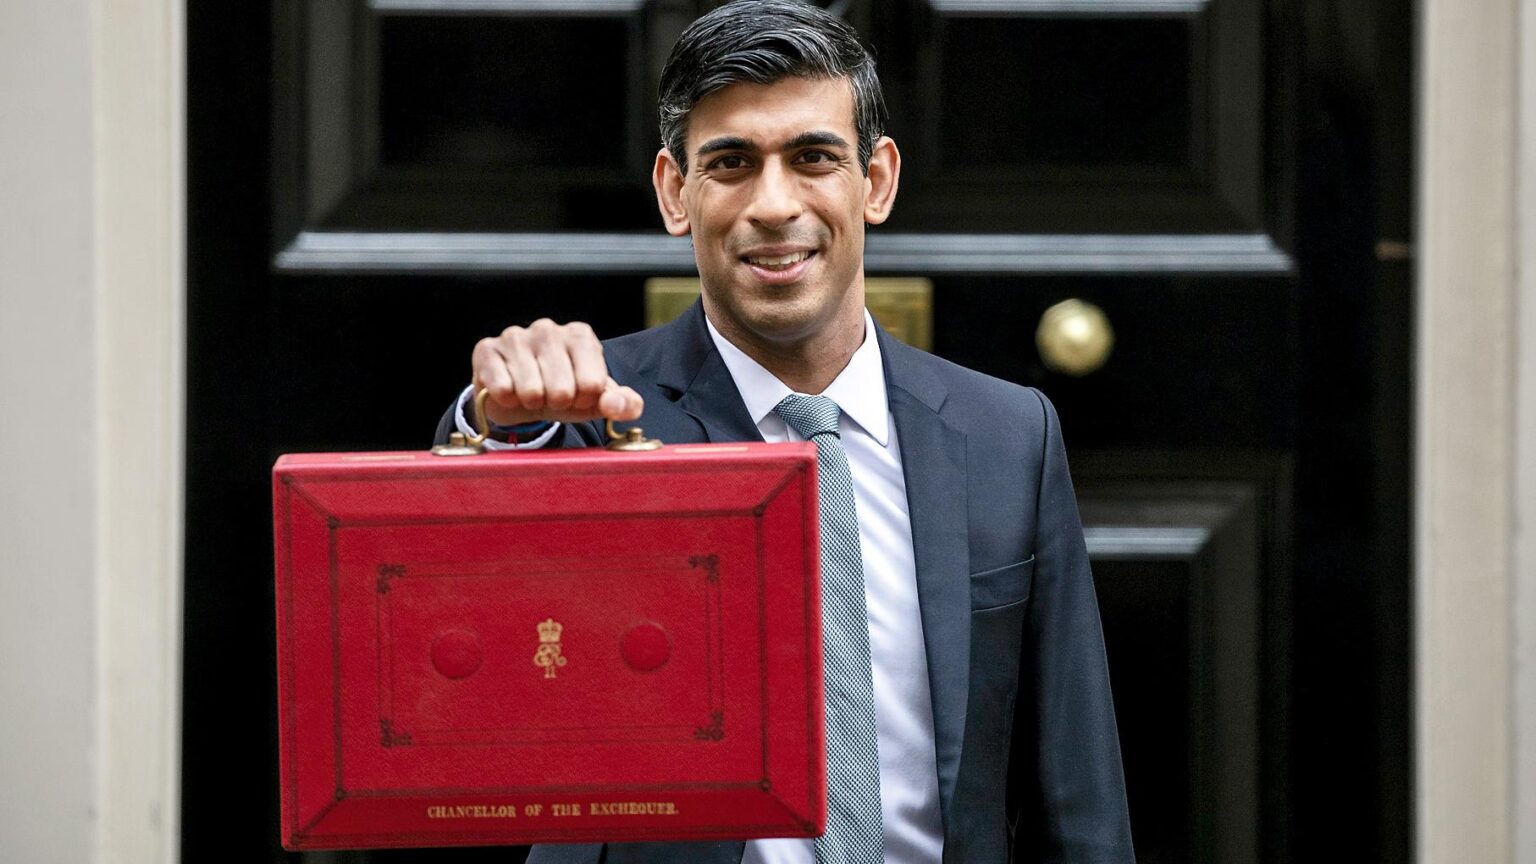 Spring statement: The key points in Chancellor Rishi Sunak's mini-budget statement